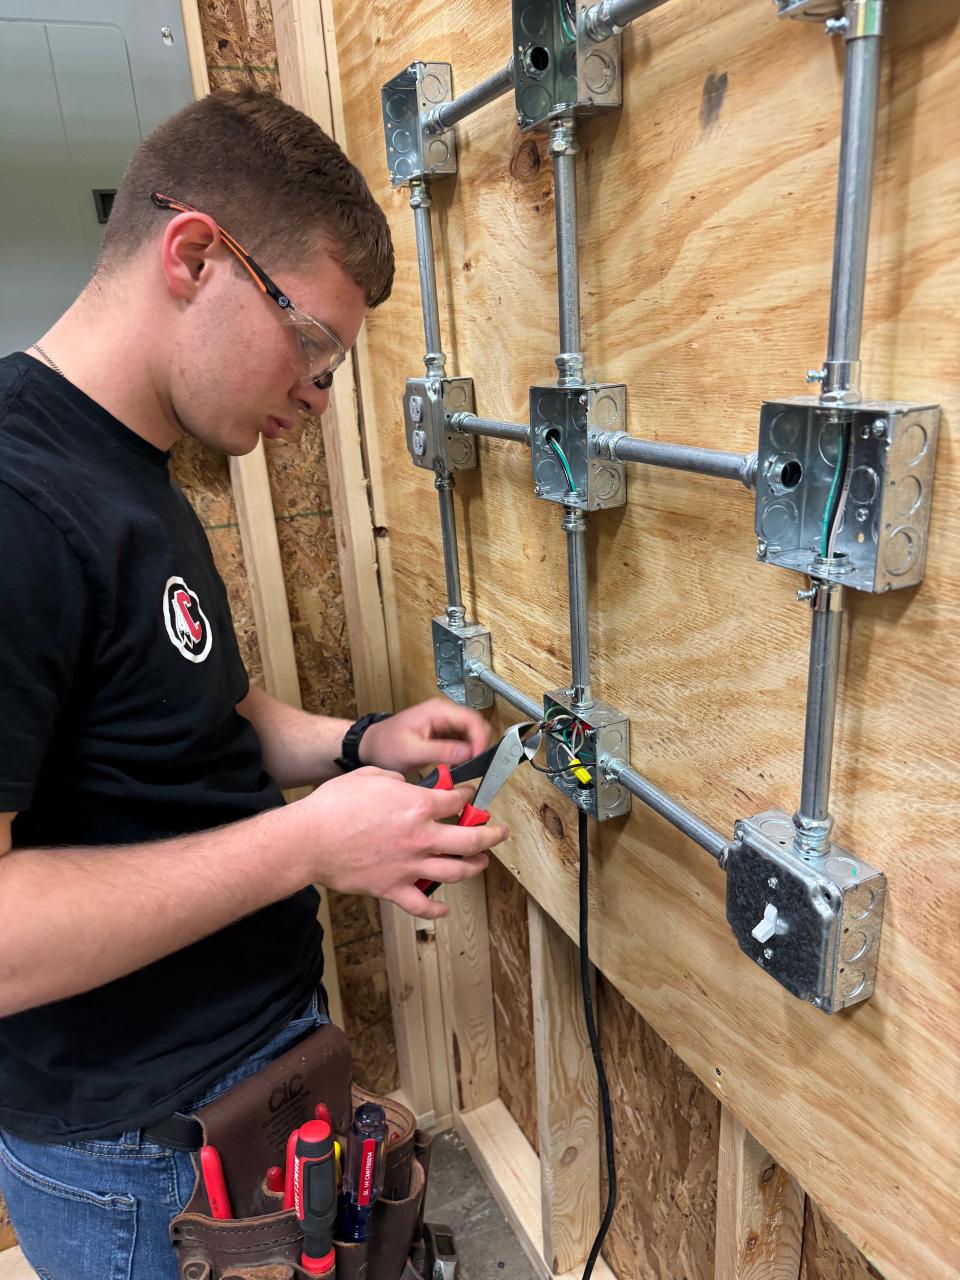 A student works on wiring during the electrical systems technology program at the Coshocton County Career Center. Completion of the program gives first year credit for the Newark Electrical Apprenticeship Program.